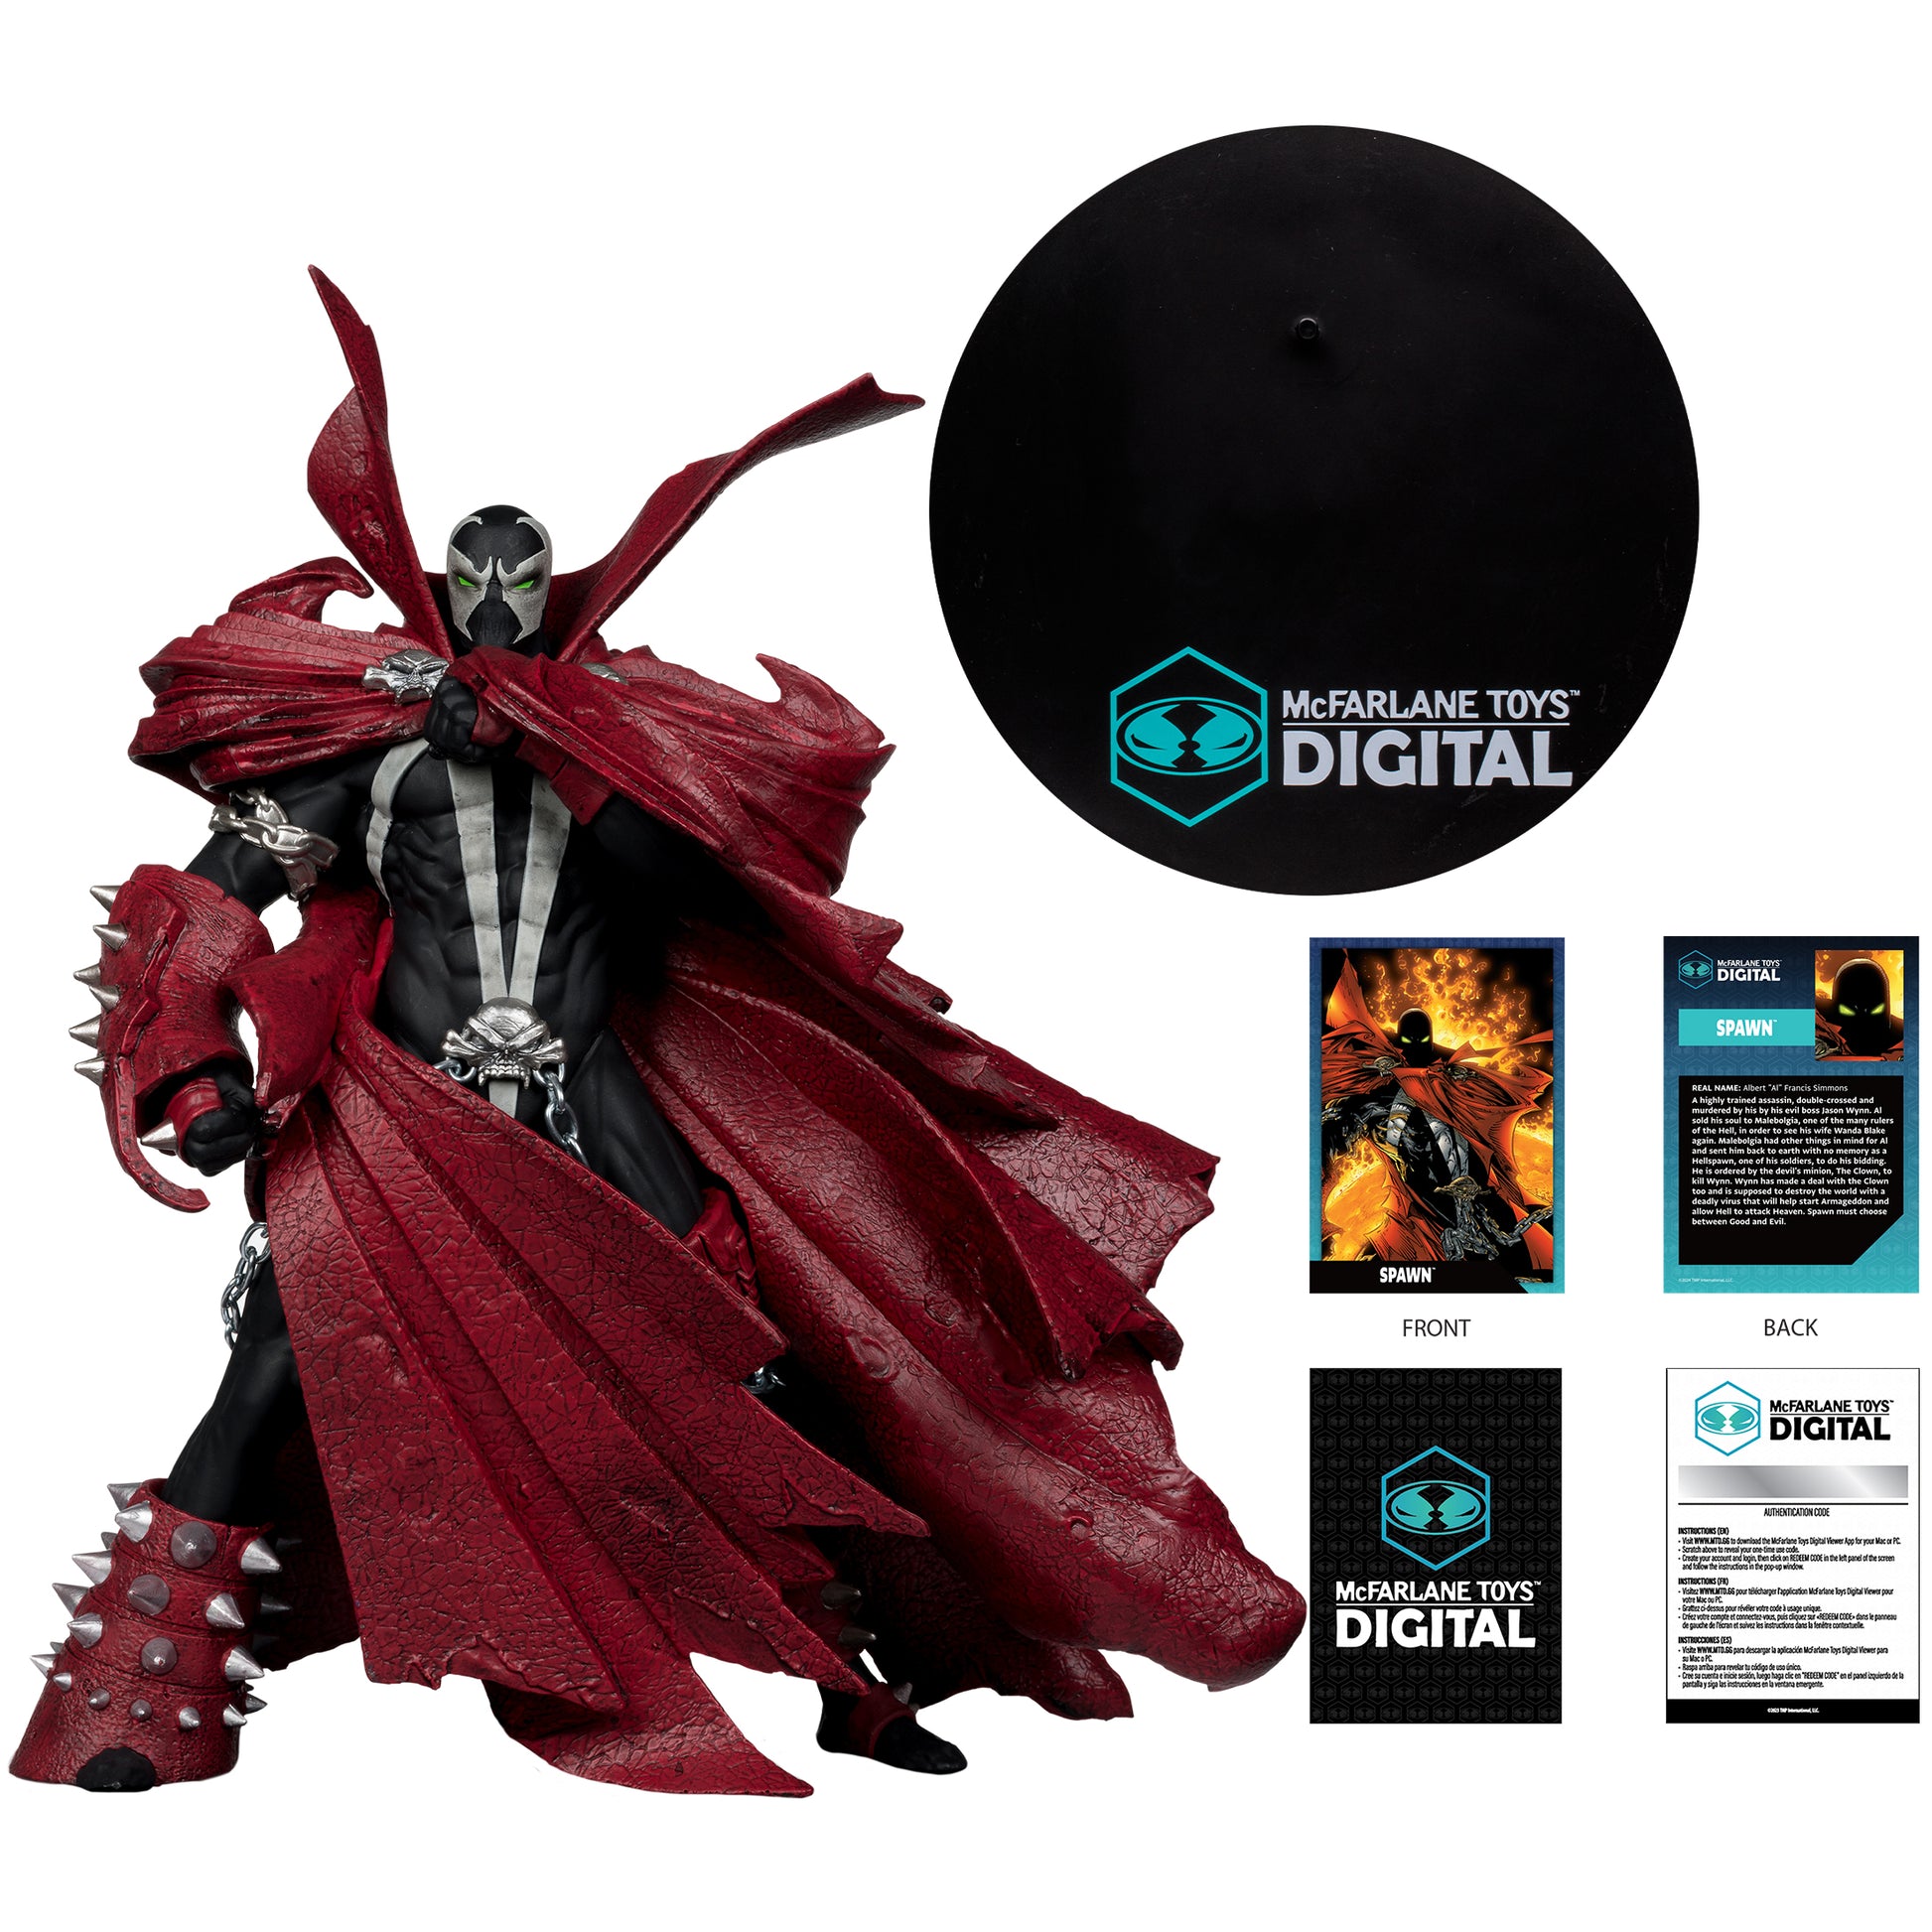 Spawn (Comic Cover #95) 1:7 Scale Posed Figure with Digital Collectible McFarlane Toys 30th Anniversary